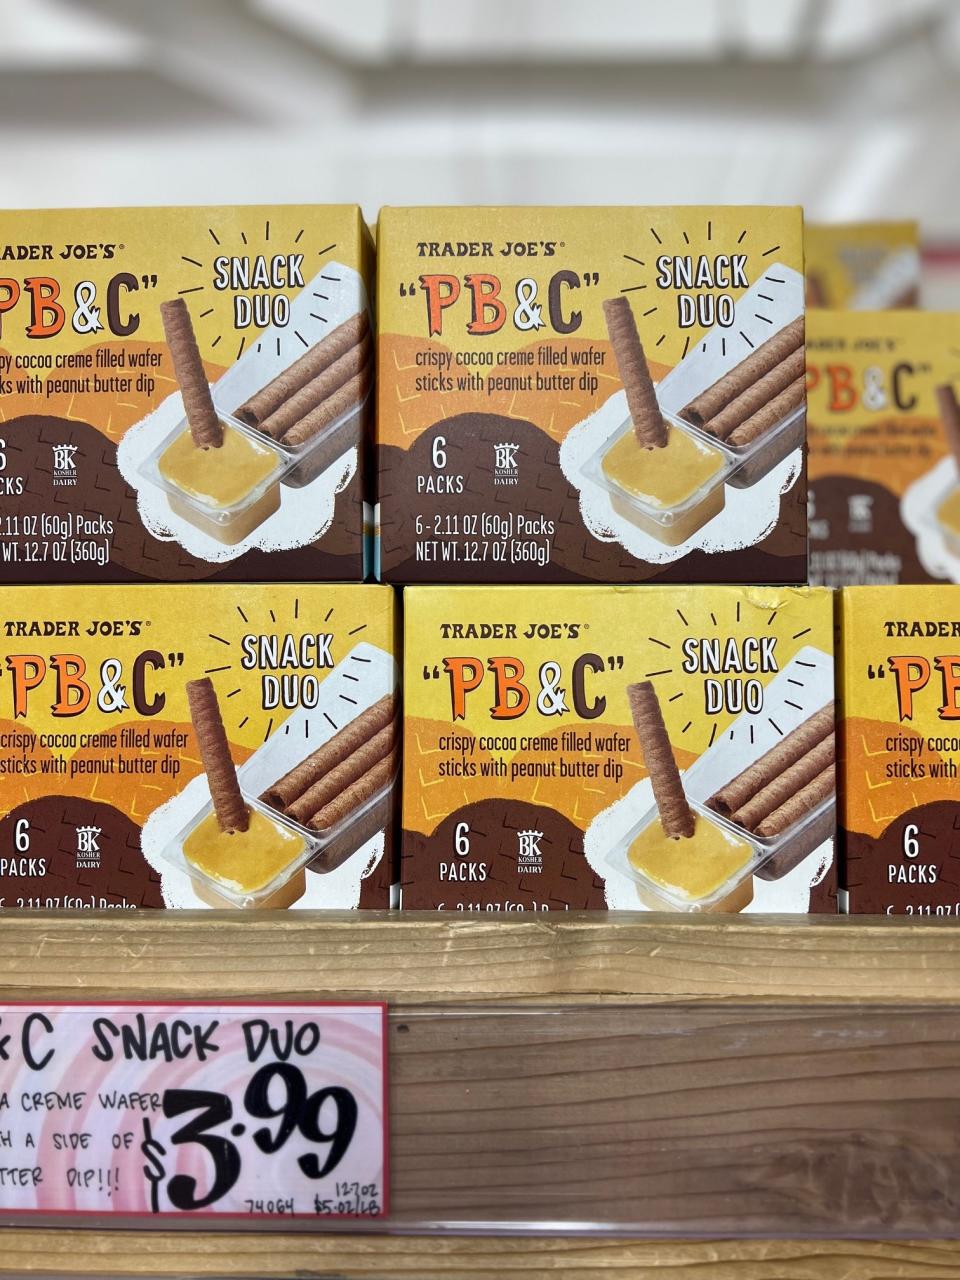 Boxes of "PB&C" Snack Duo, "crispy cocoa creme filled wafer sticks with peanut butter dip," on display